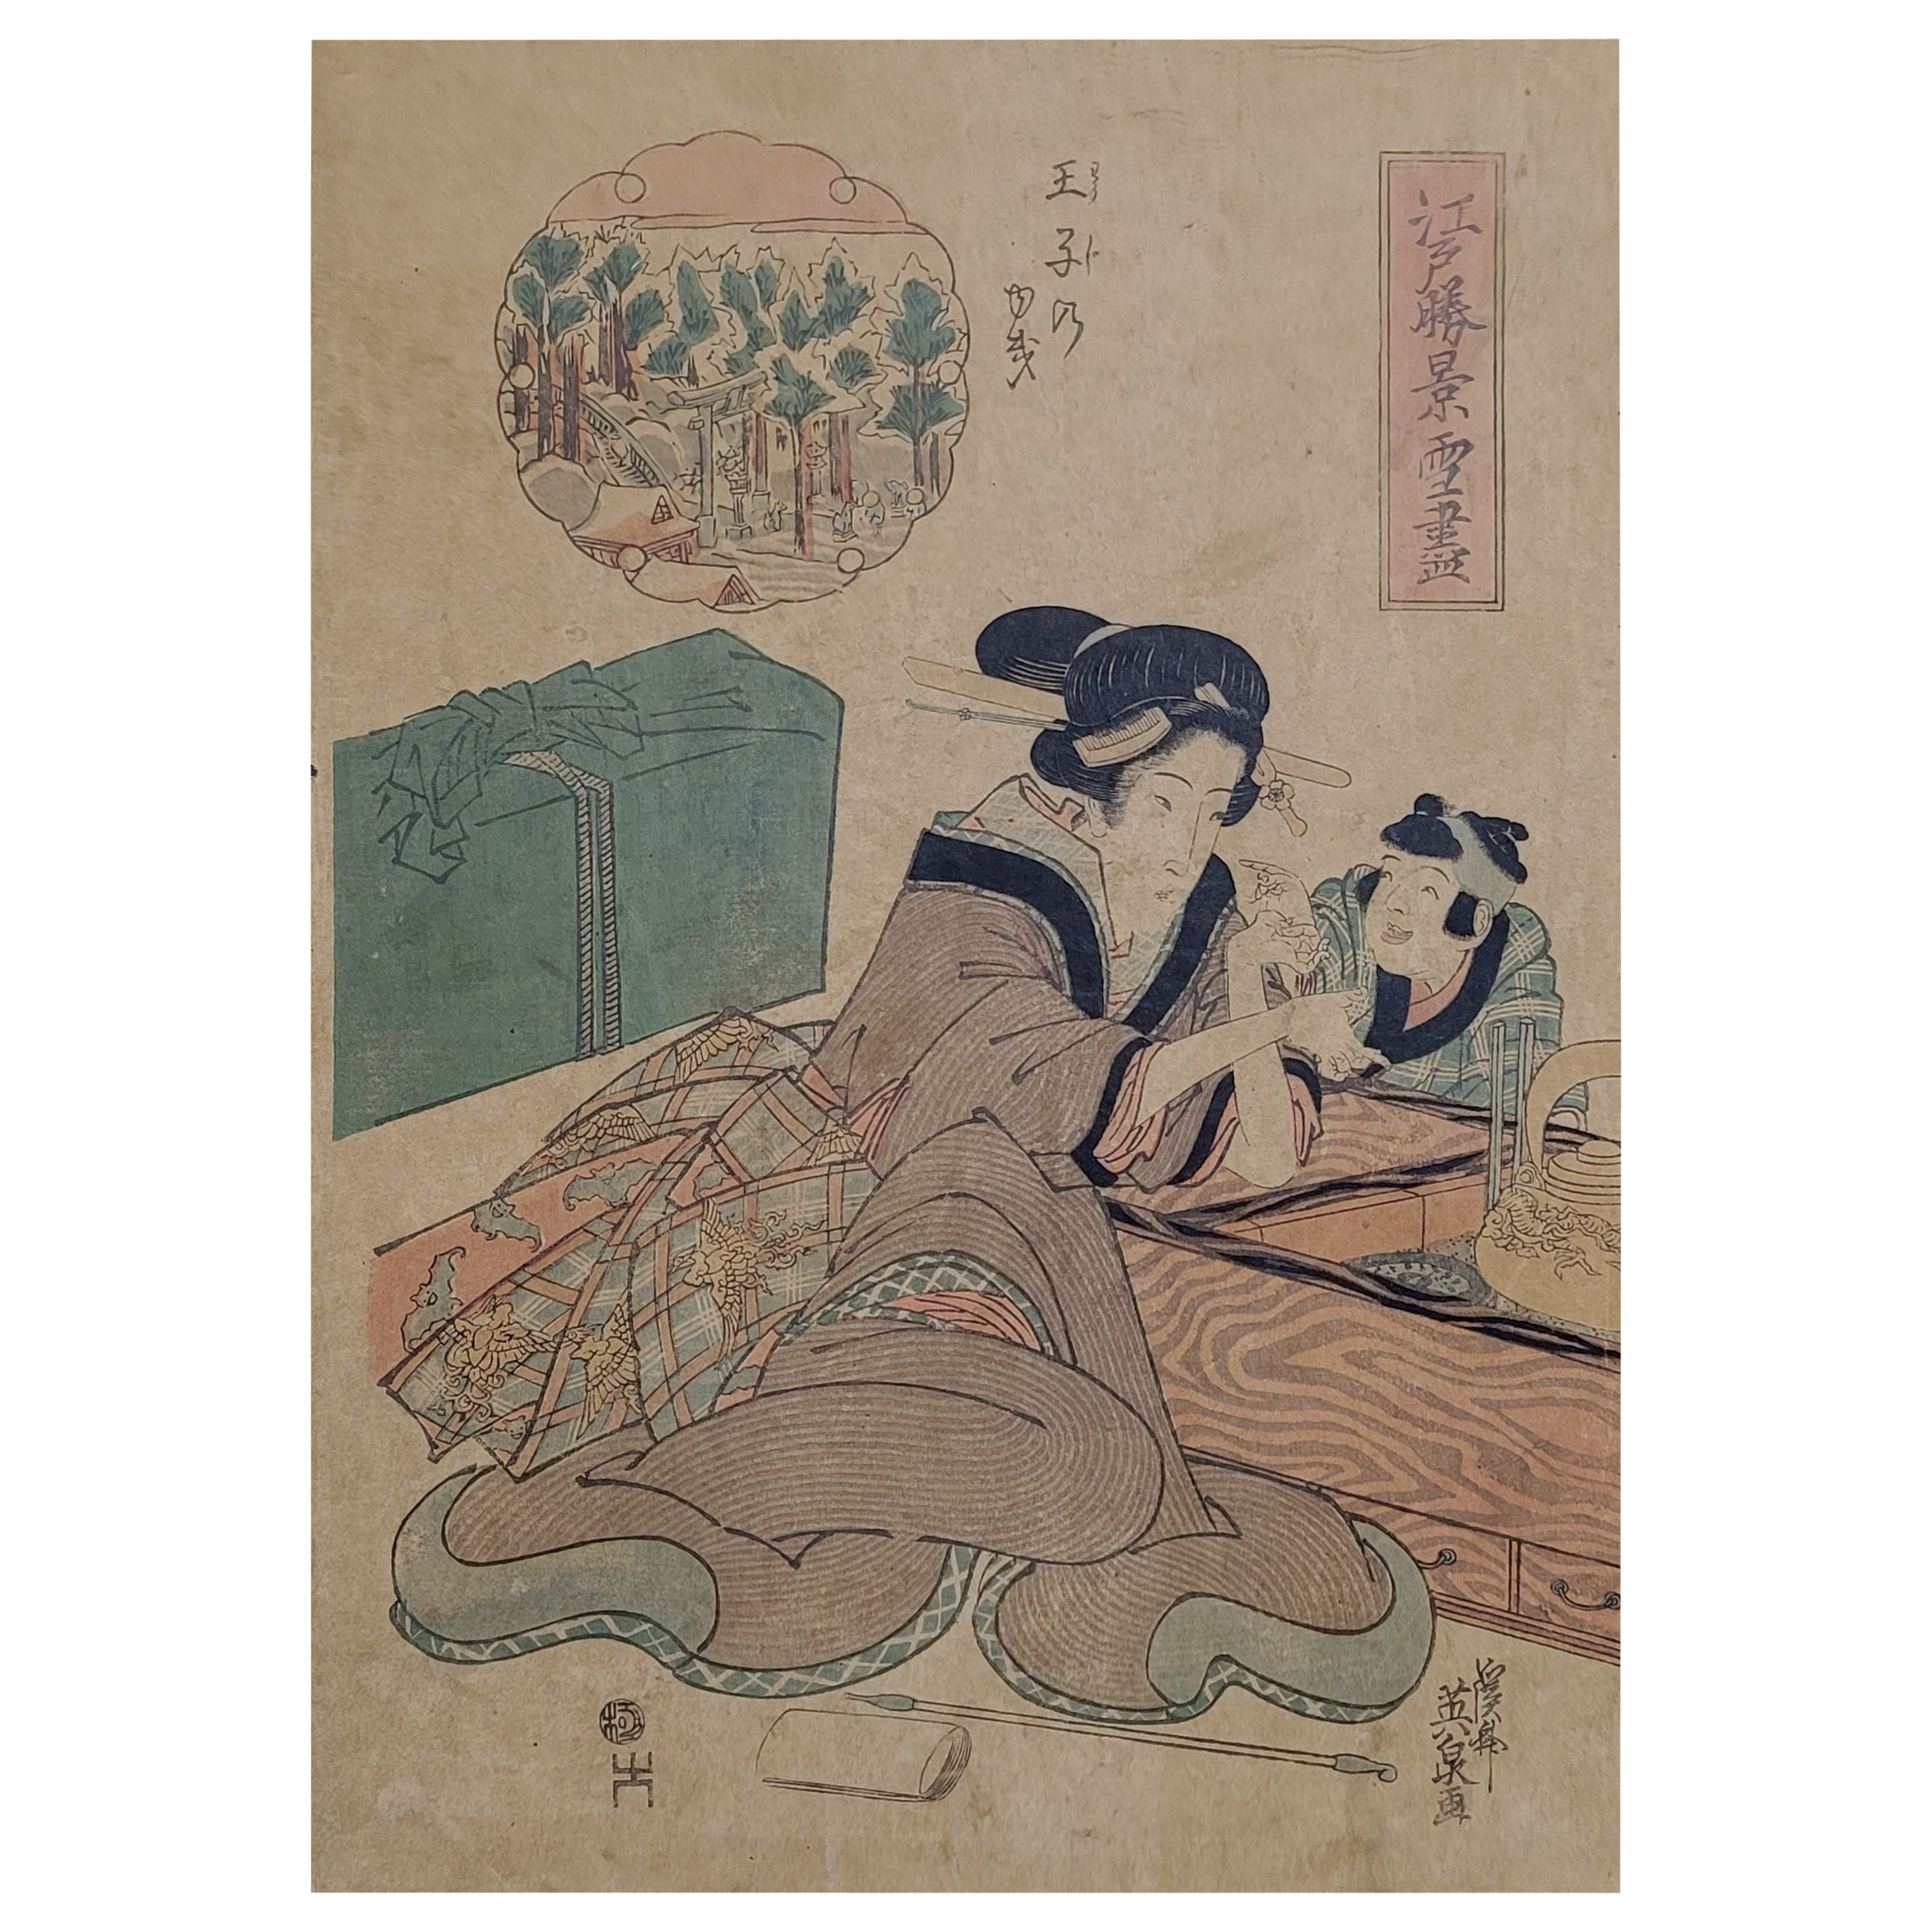 Japanese Woodblock Print by Keisai Eisen 渓斎 英泉 For Sale